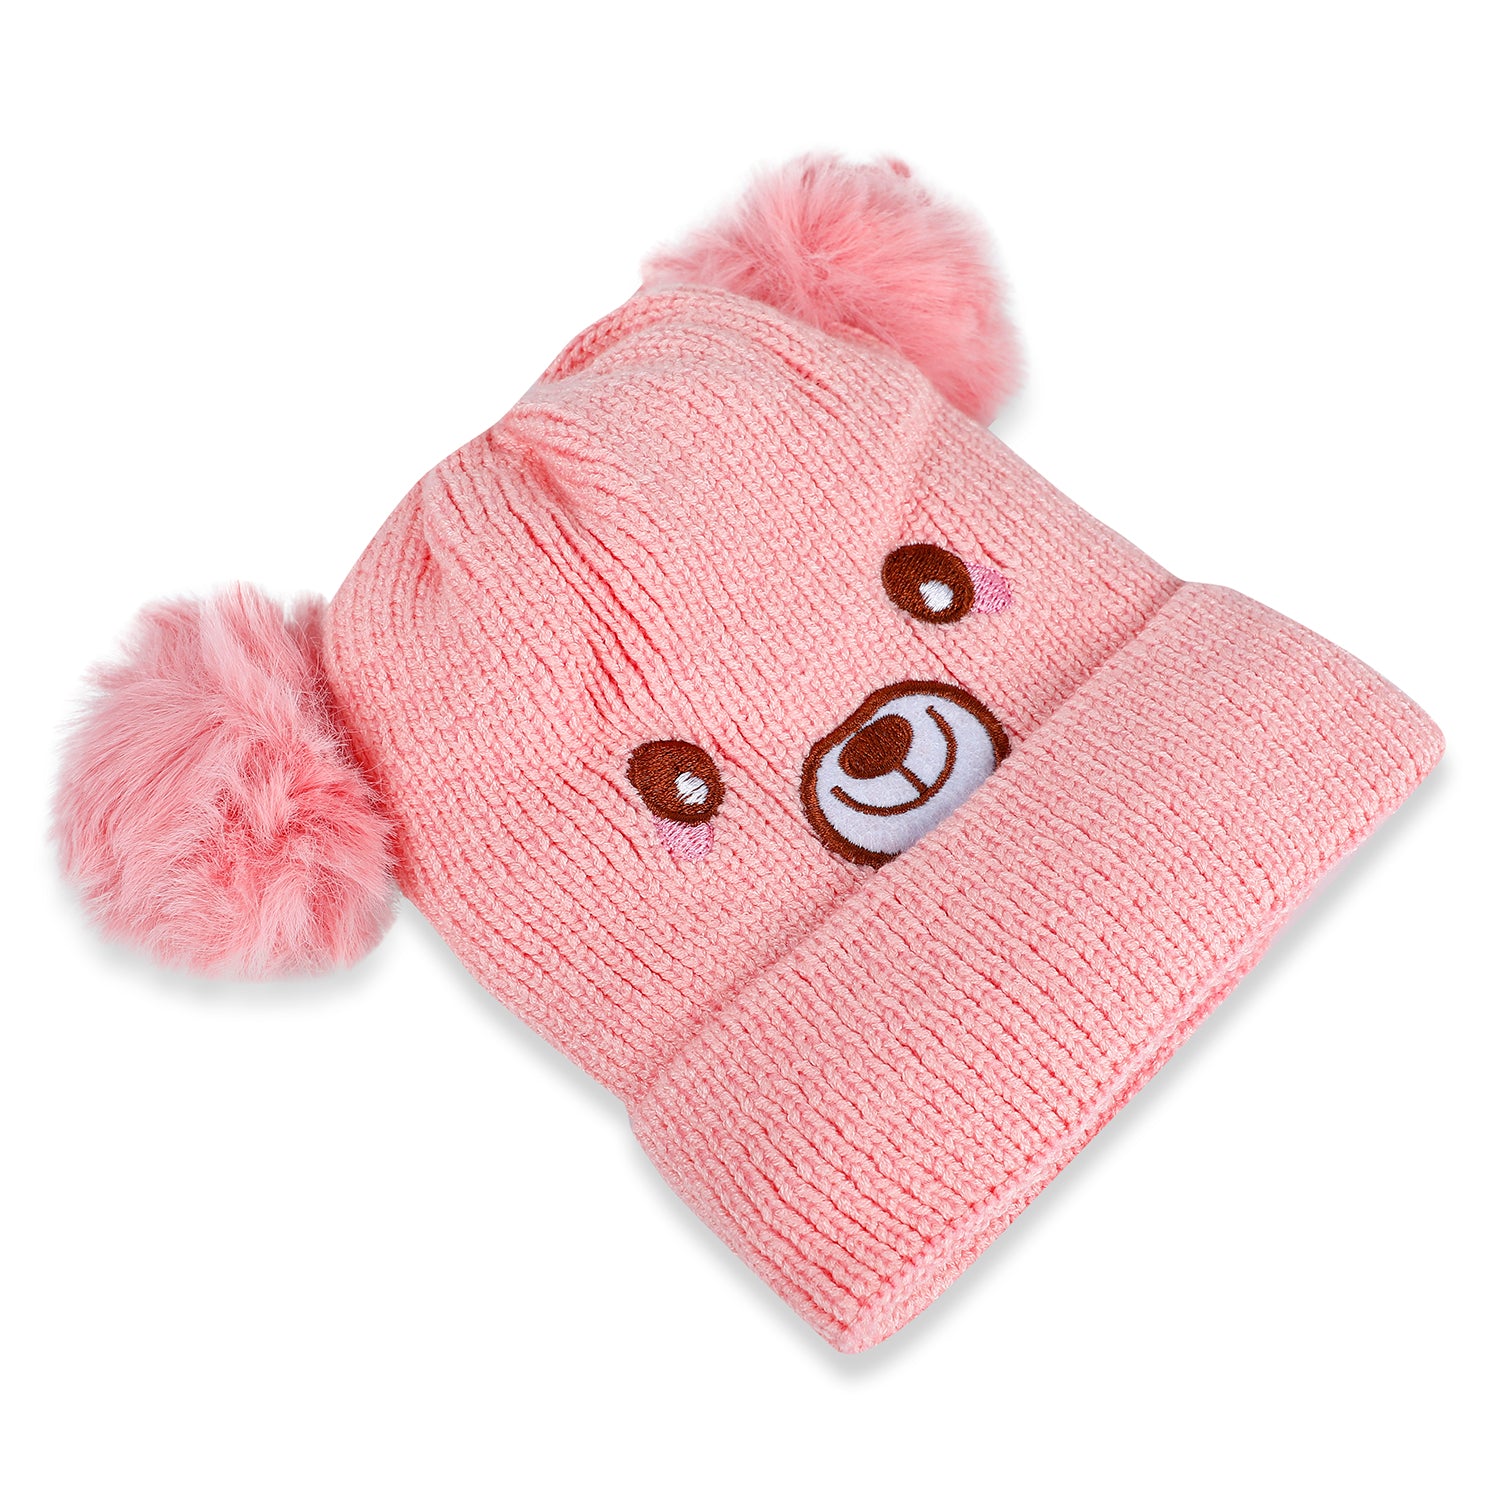 Baby Moo Bear Pom Pom Breathable Beanie Warm Knitted Woollen Cap - Pink